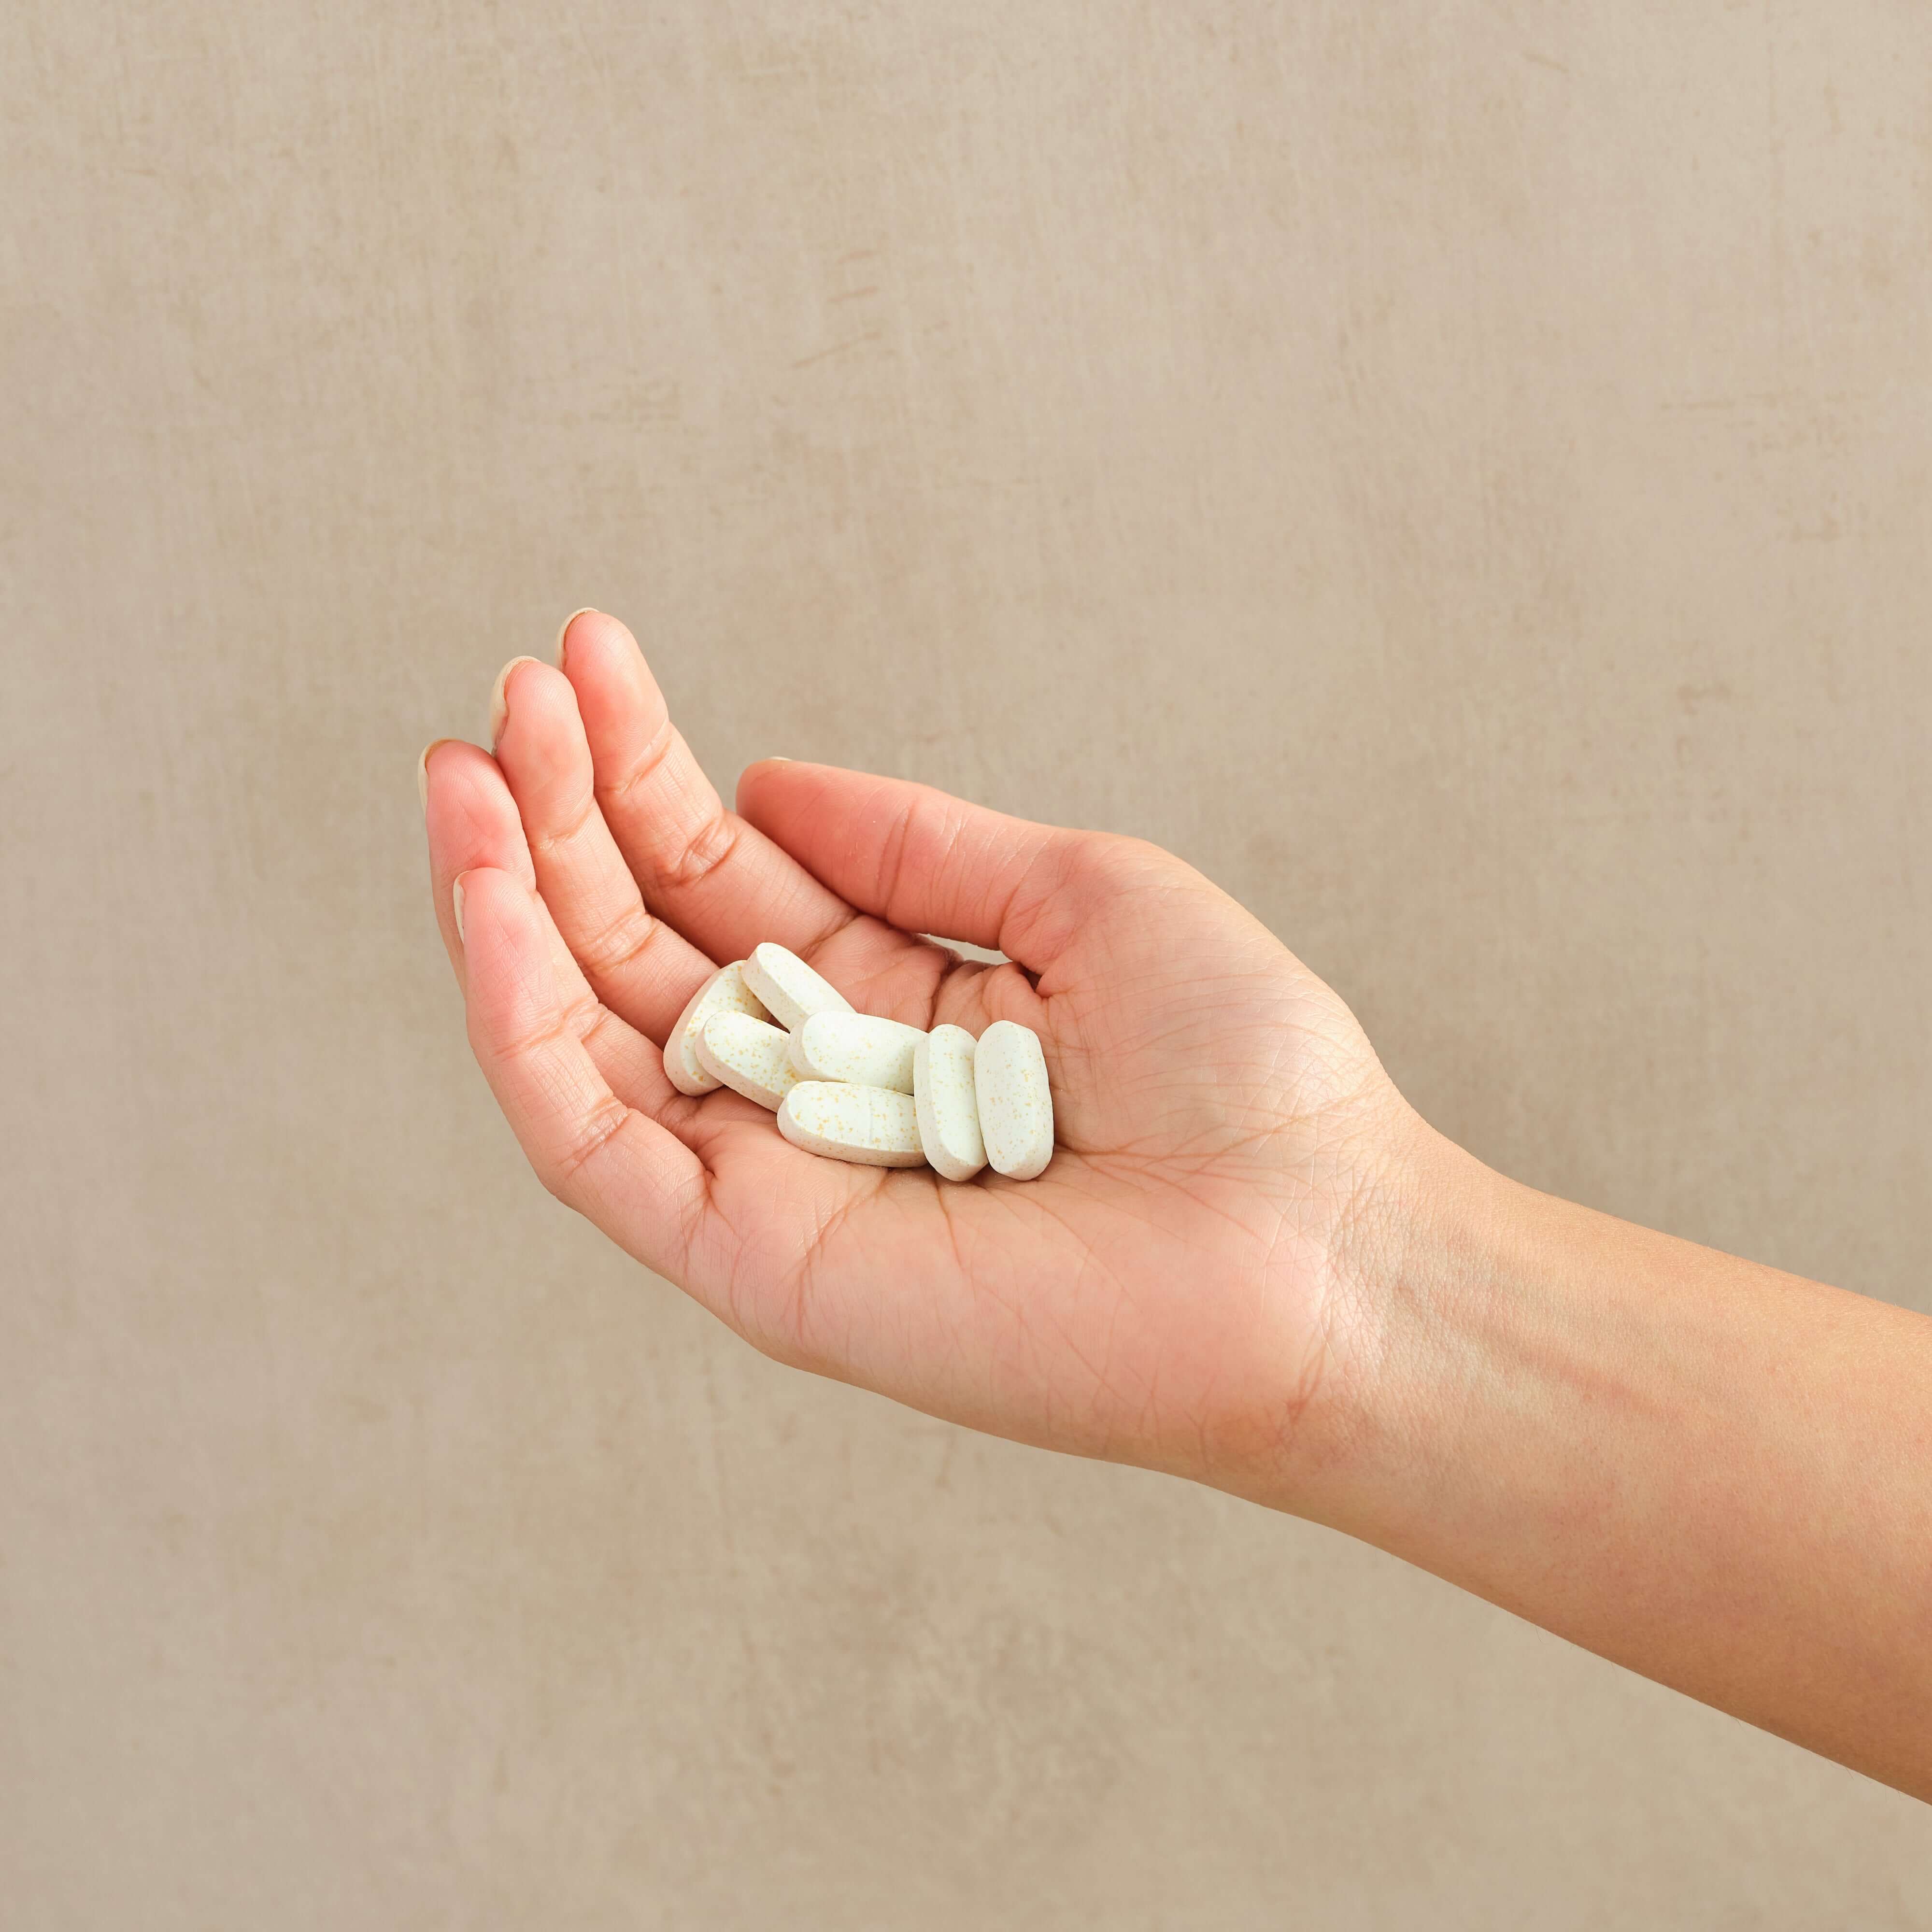 Supplements with Vitamin D3 and K2